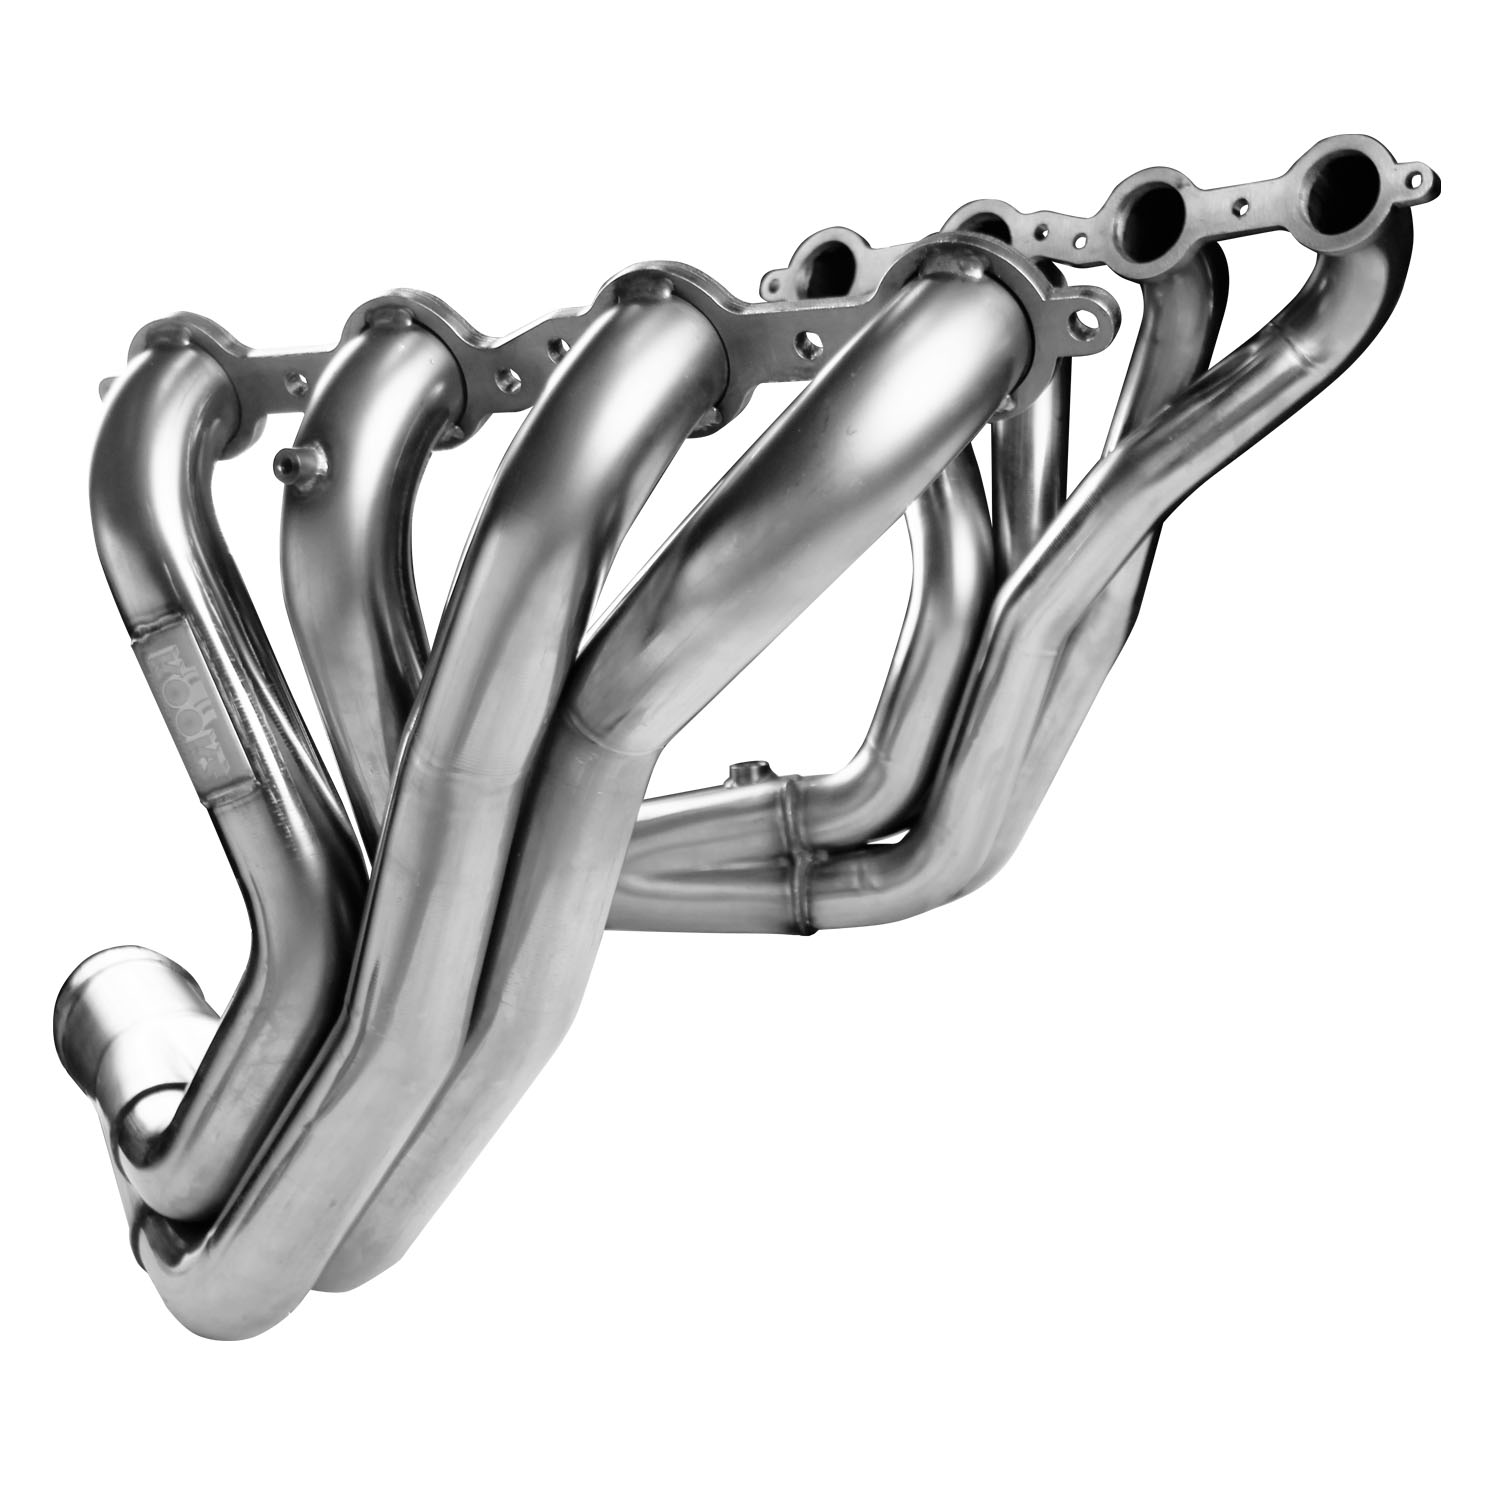 Stainless Steel Headers Race Version-Non Emission 1.75 x 3" Long Tube 97-04 Corvette C5 LS1/LS6 5.7L 02 Fittings Only w/Merge Co